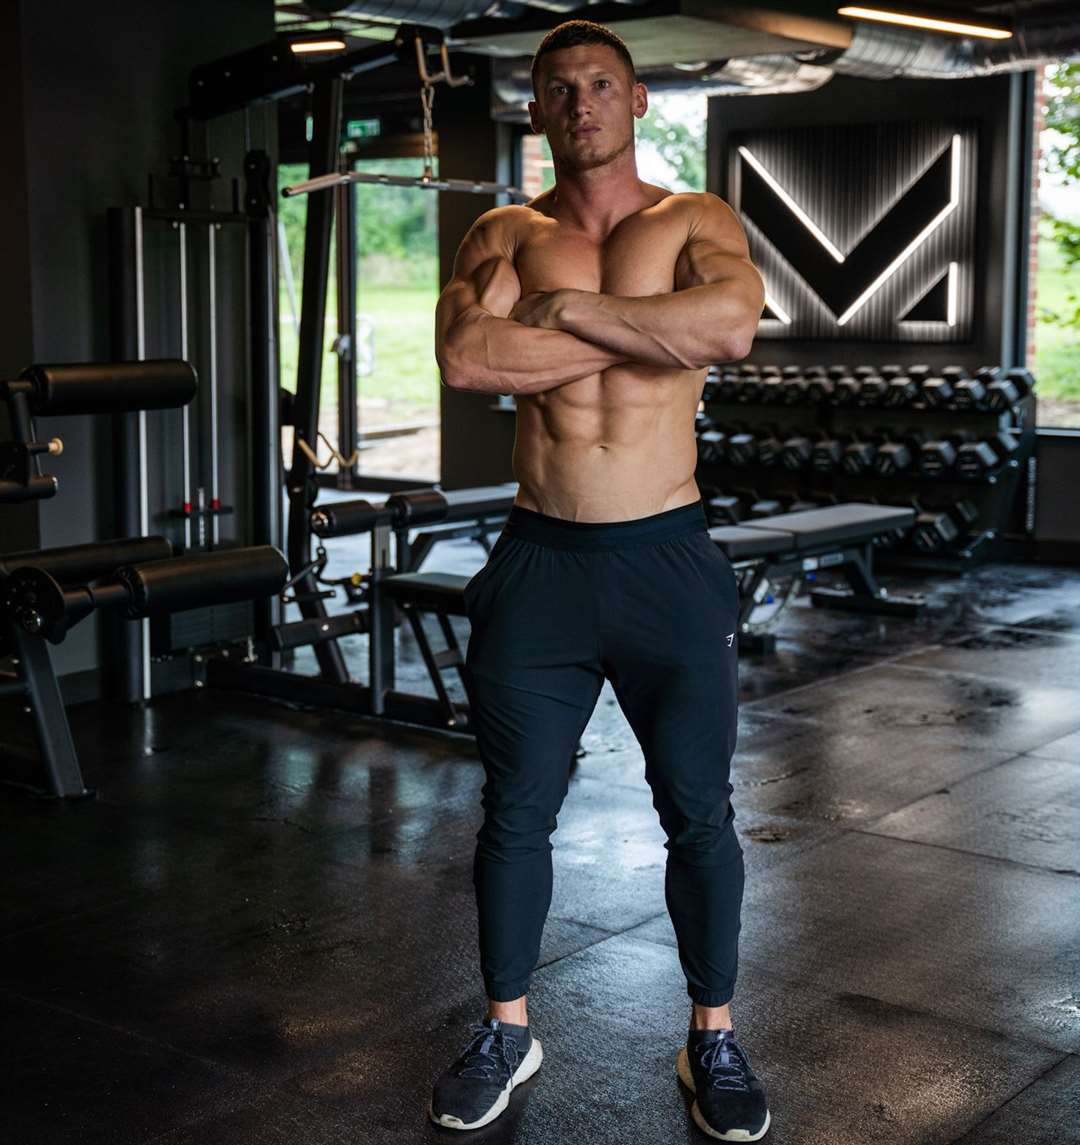 Matt Morsia in one of his Morsia gyms, which opened this year. Picture: Instagram / Morsia